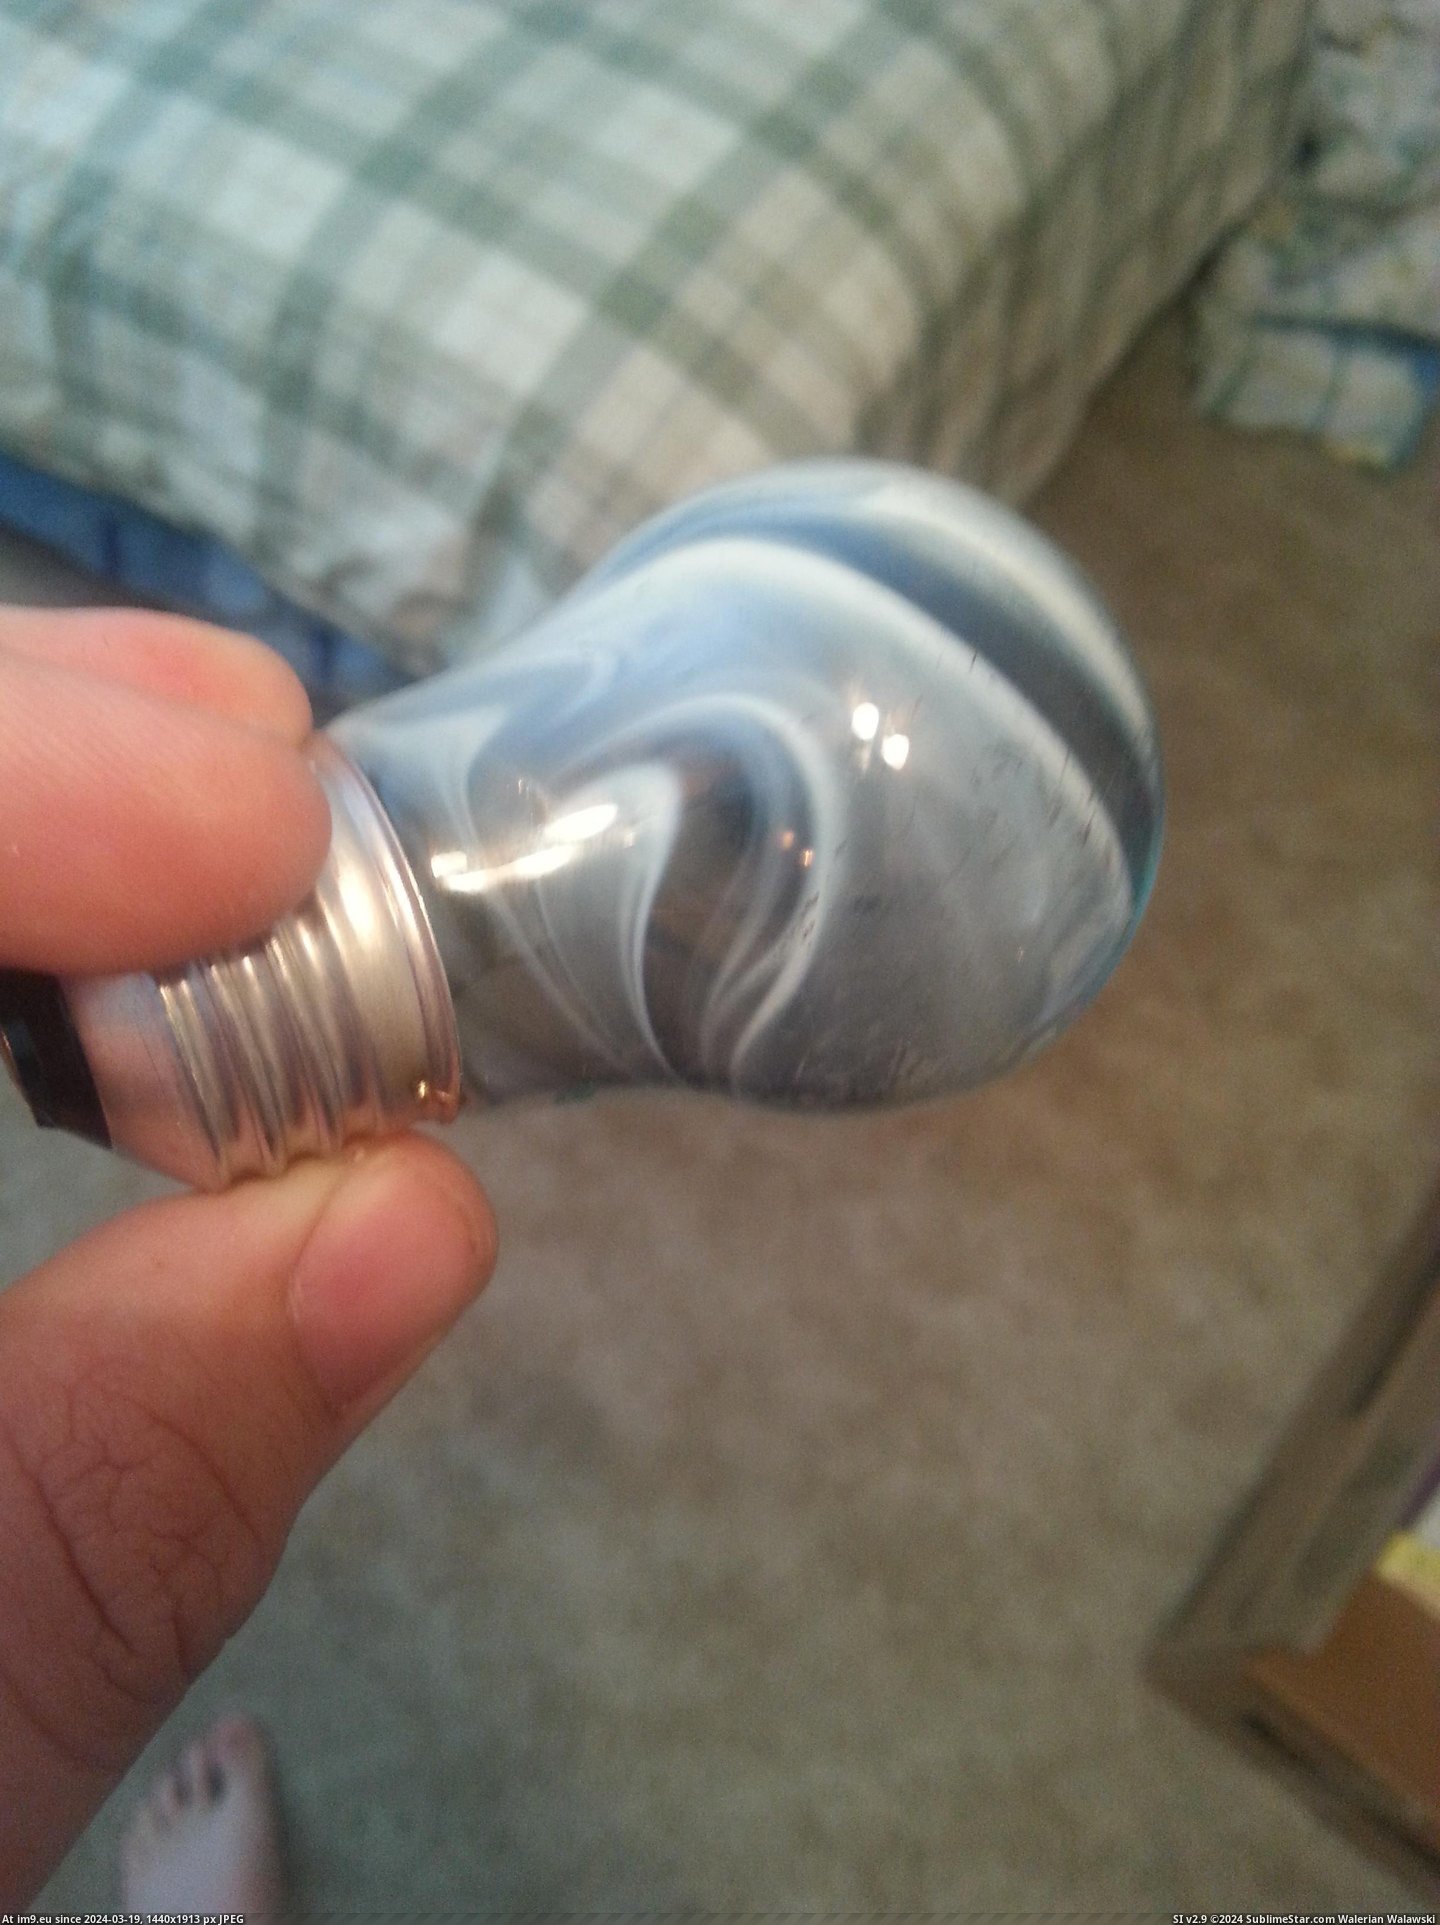 #Design #Out #Lightbulb #Cool #Clear [Mildlyinteresting] Clear Lightbulb Went Out And Made This Cool Design Pic. (Изображение из альбом My r/MILDLYINTERESTING favs))